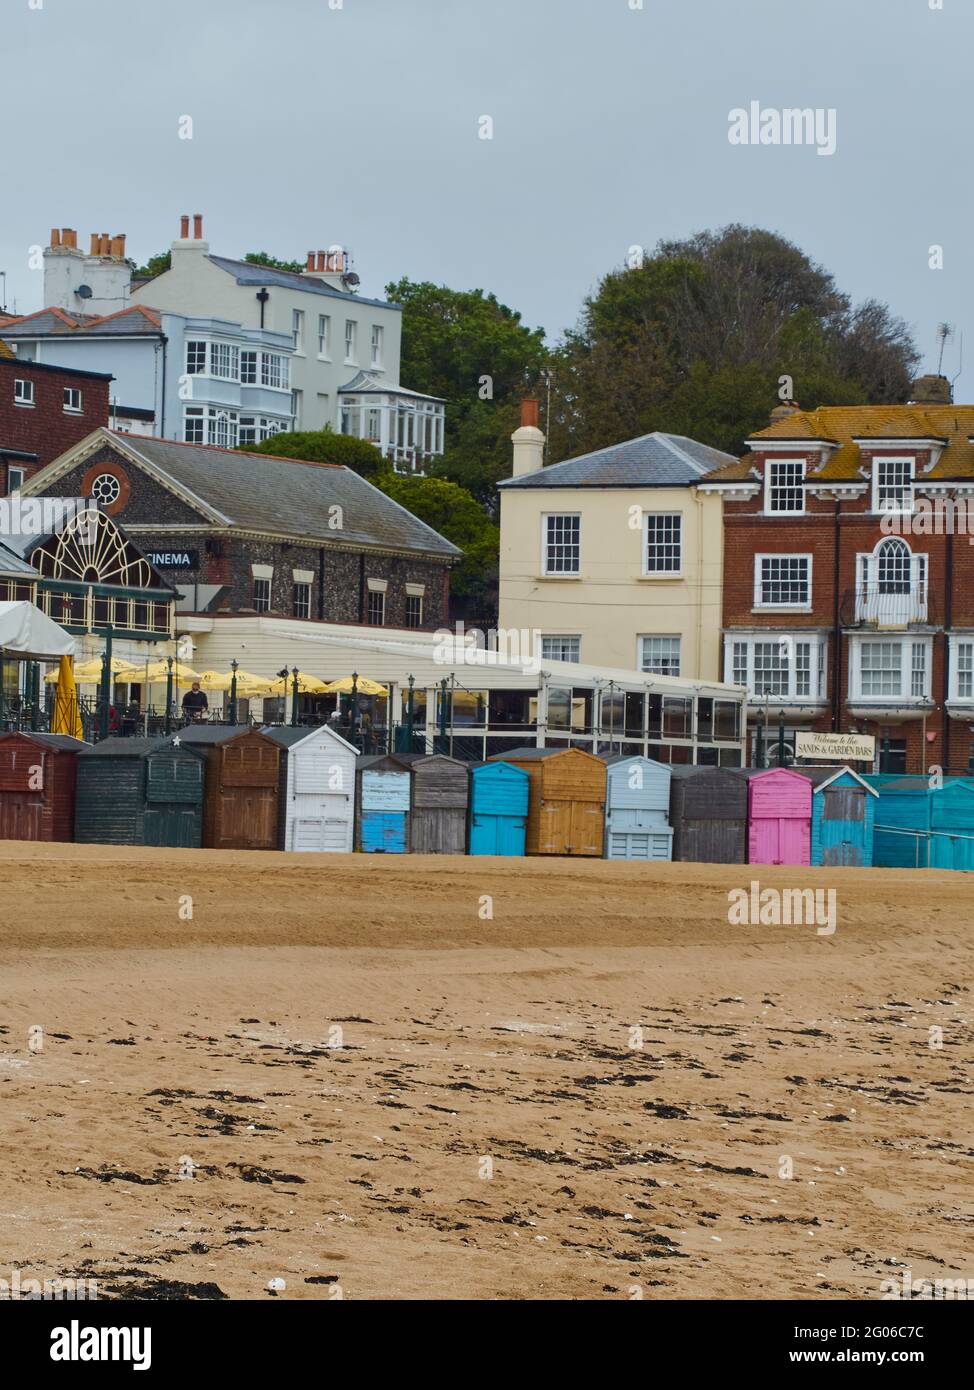 The beach, beach huts and buildings of a seaside town - specifically Broadstairs. A heavy sky hangs overhead, perhaps why the beach is deserted. Stock Photo